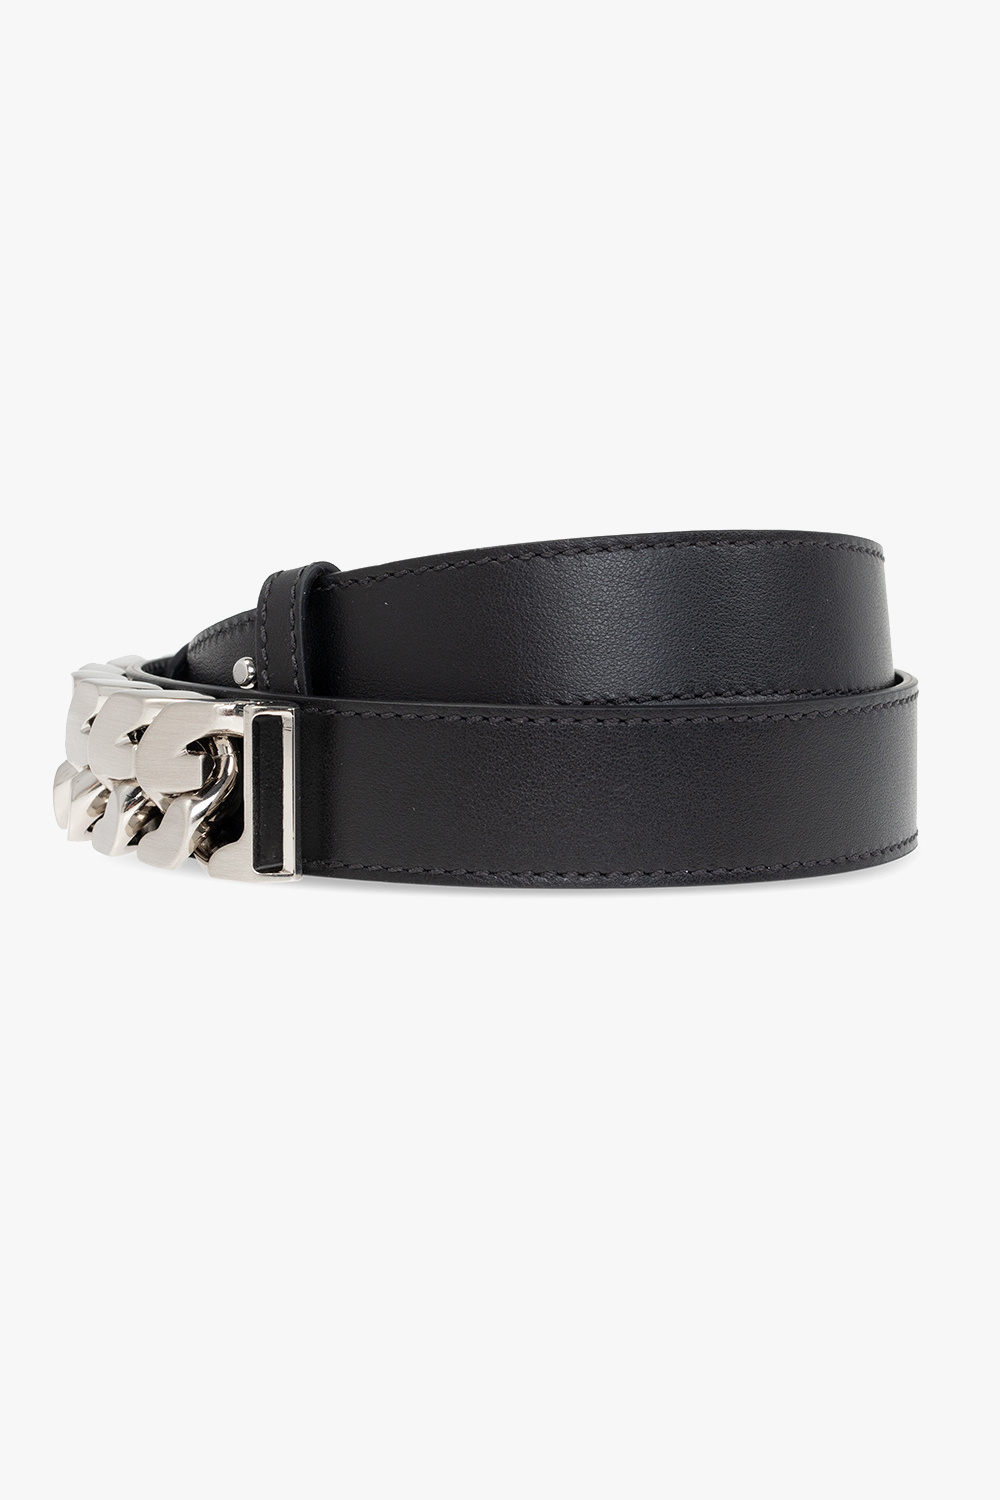 Givenchy Belt with chain | Women's Accessories | Vitkac